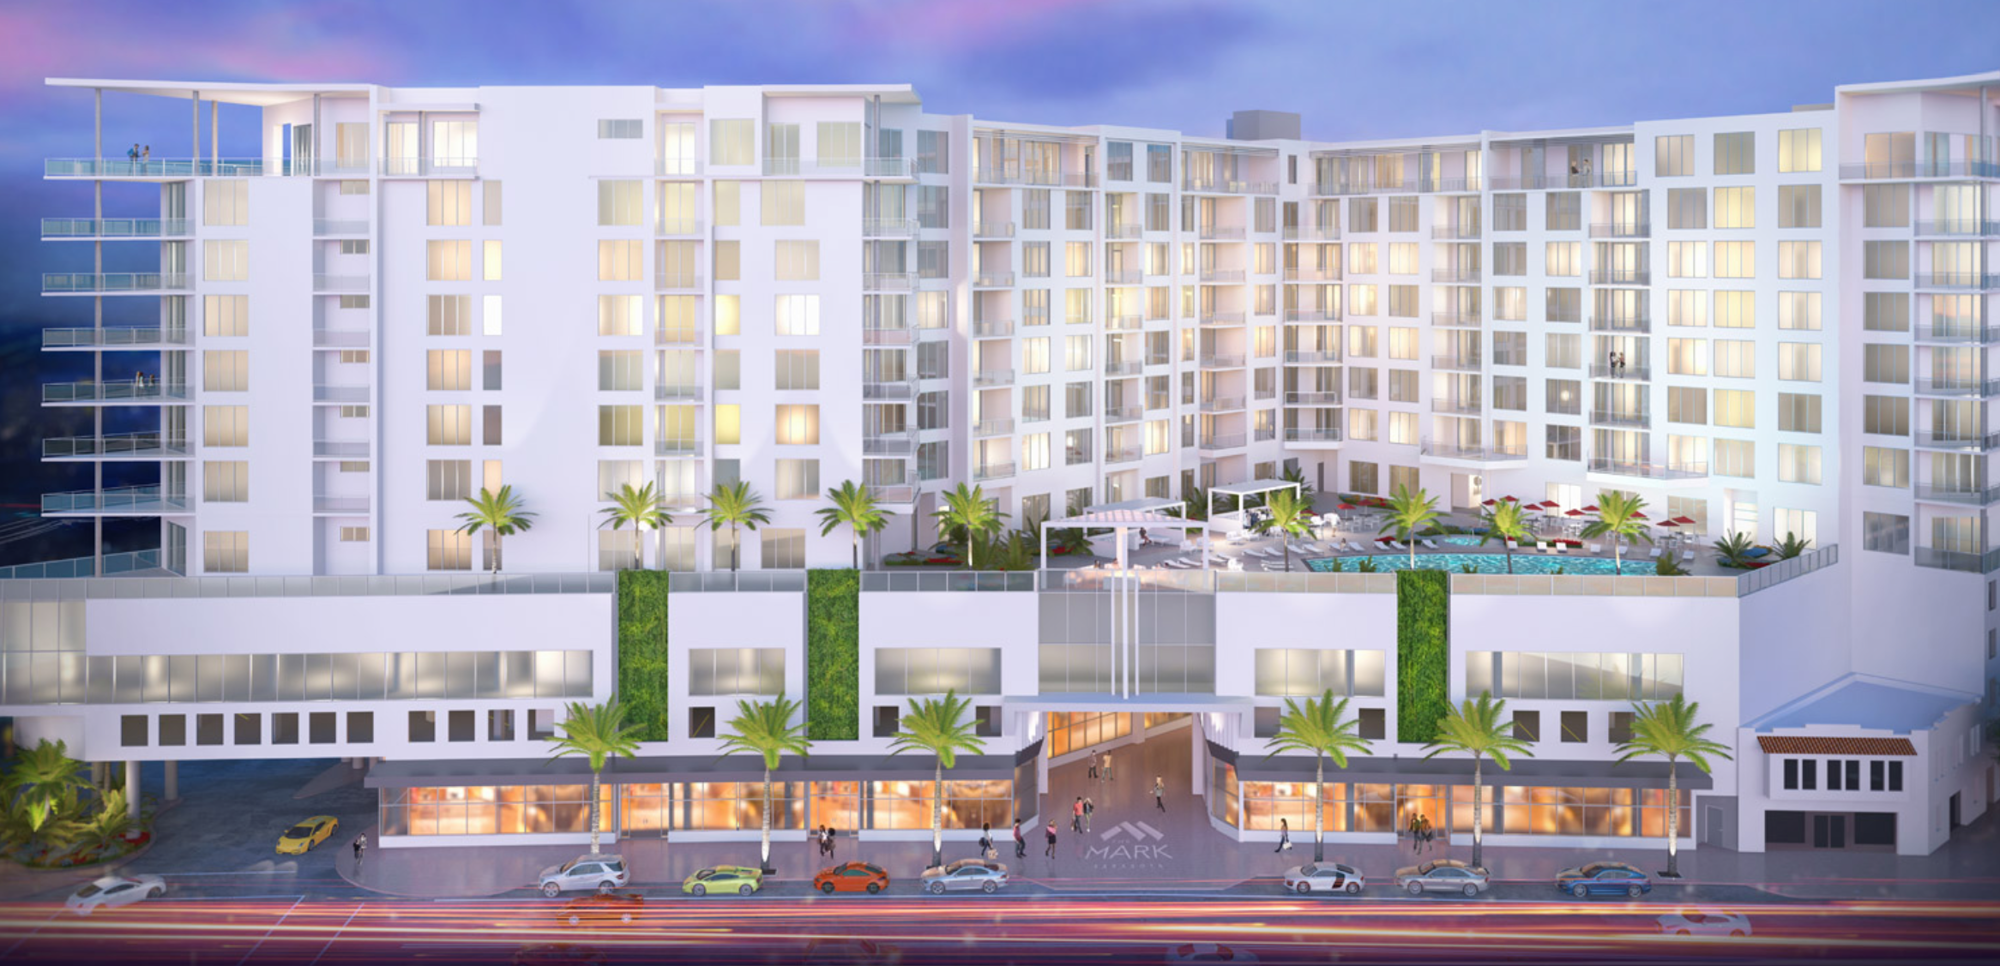 The Mark, a large-scale condo project in the middle of downtown, exemplifies the explosion in luxury development in Sarasota.